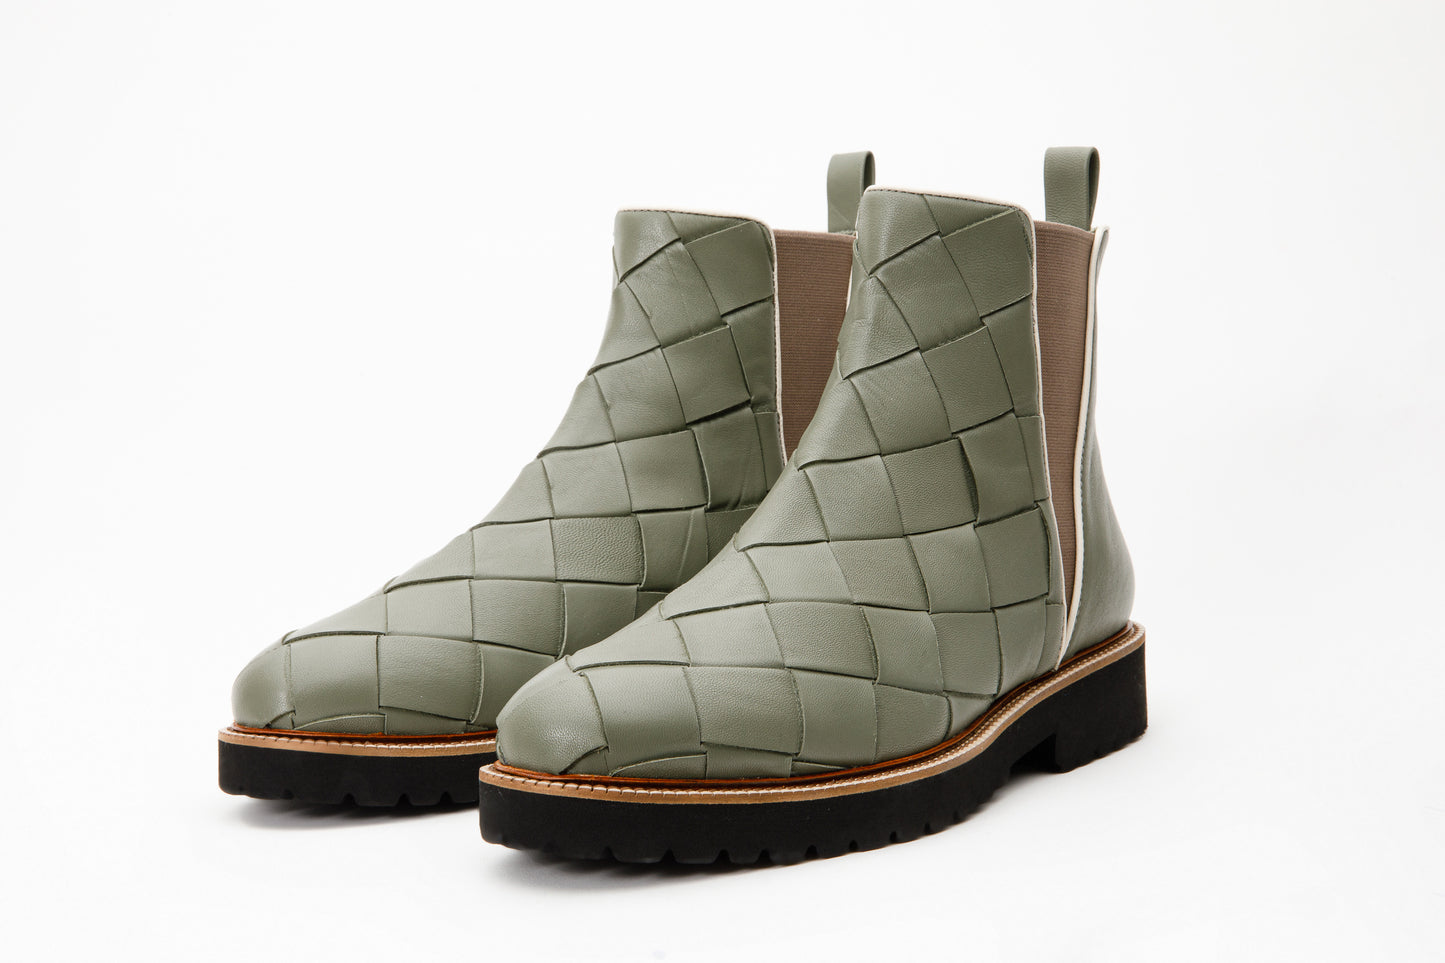 The Luisina Green Handwoven Leather Ankle Boot Final Sale!